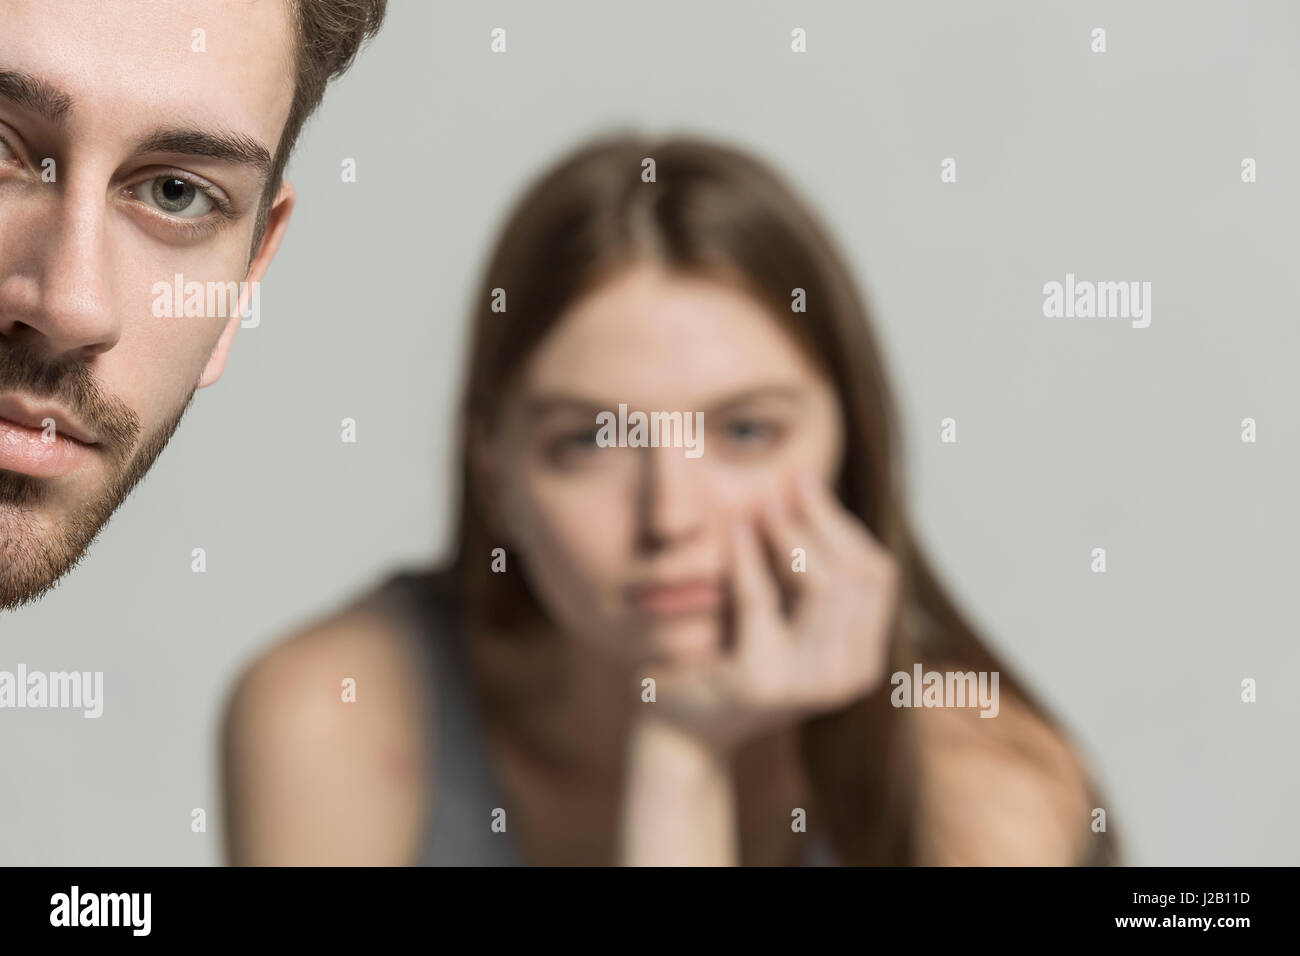 Cropped portrait of young man with woman in background Stock Photo